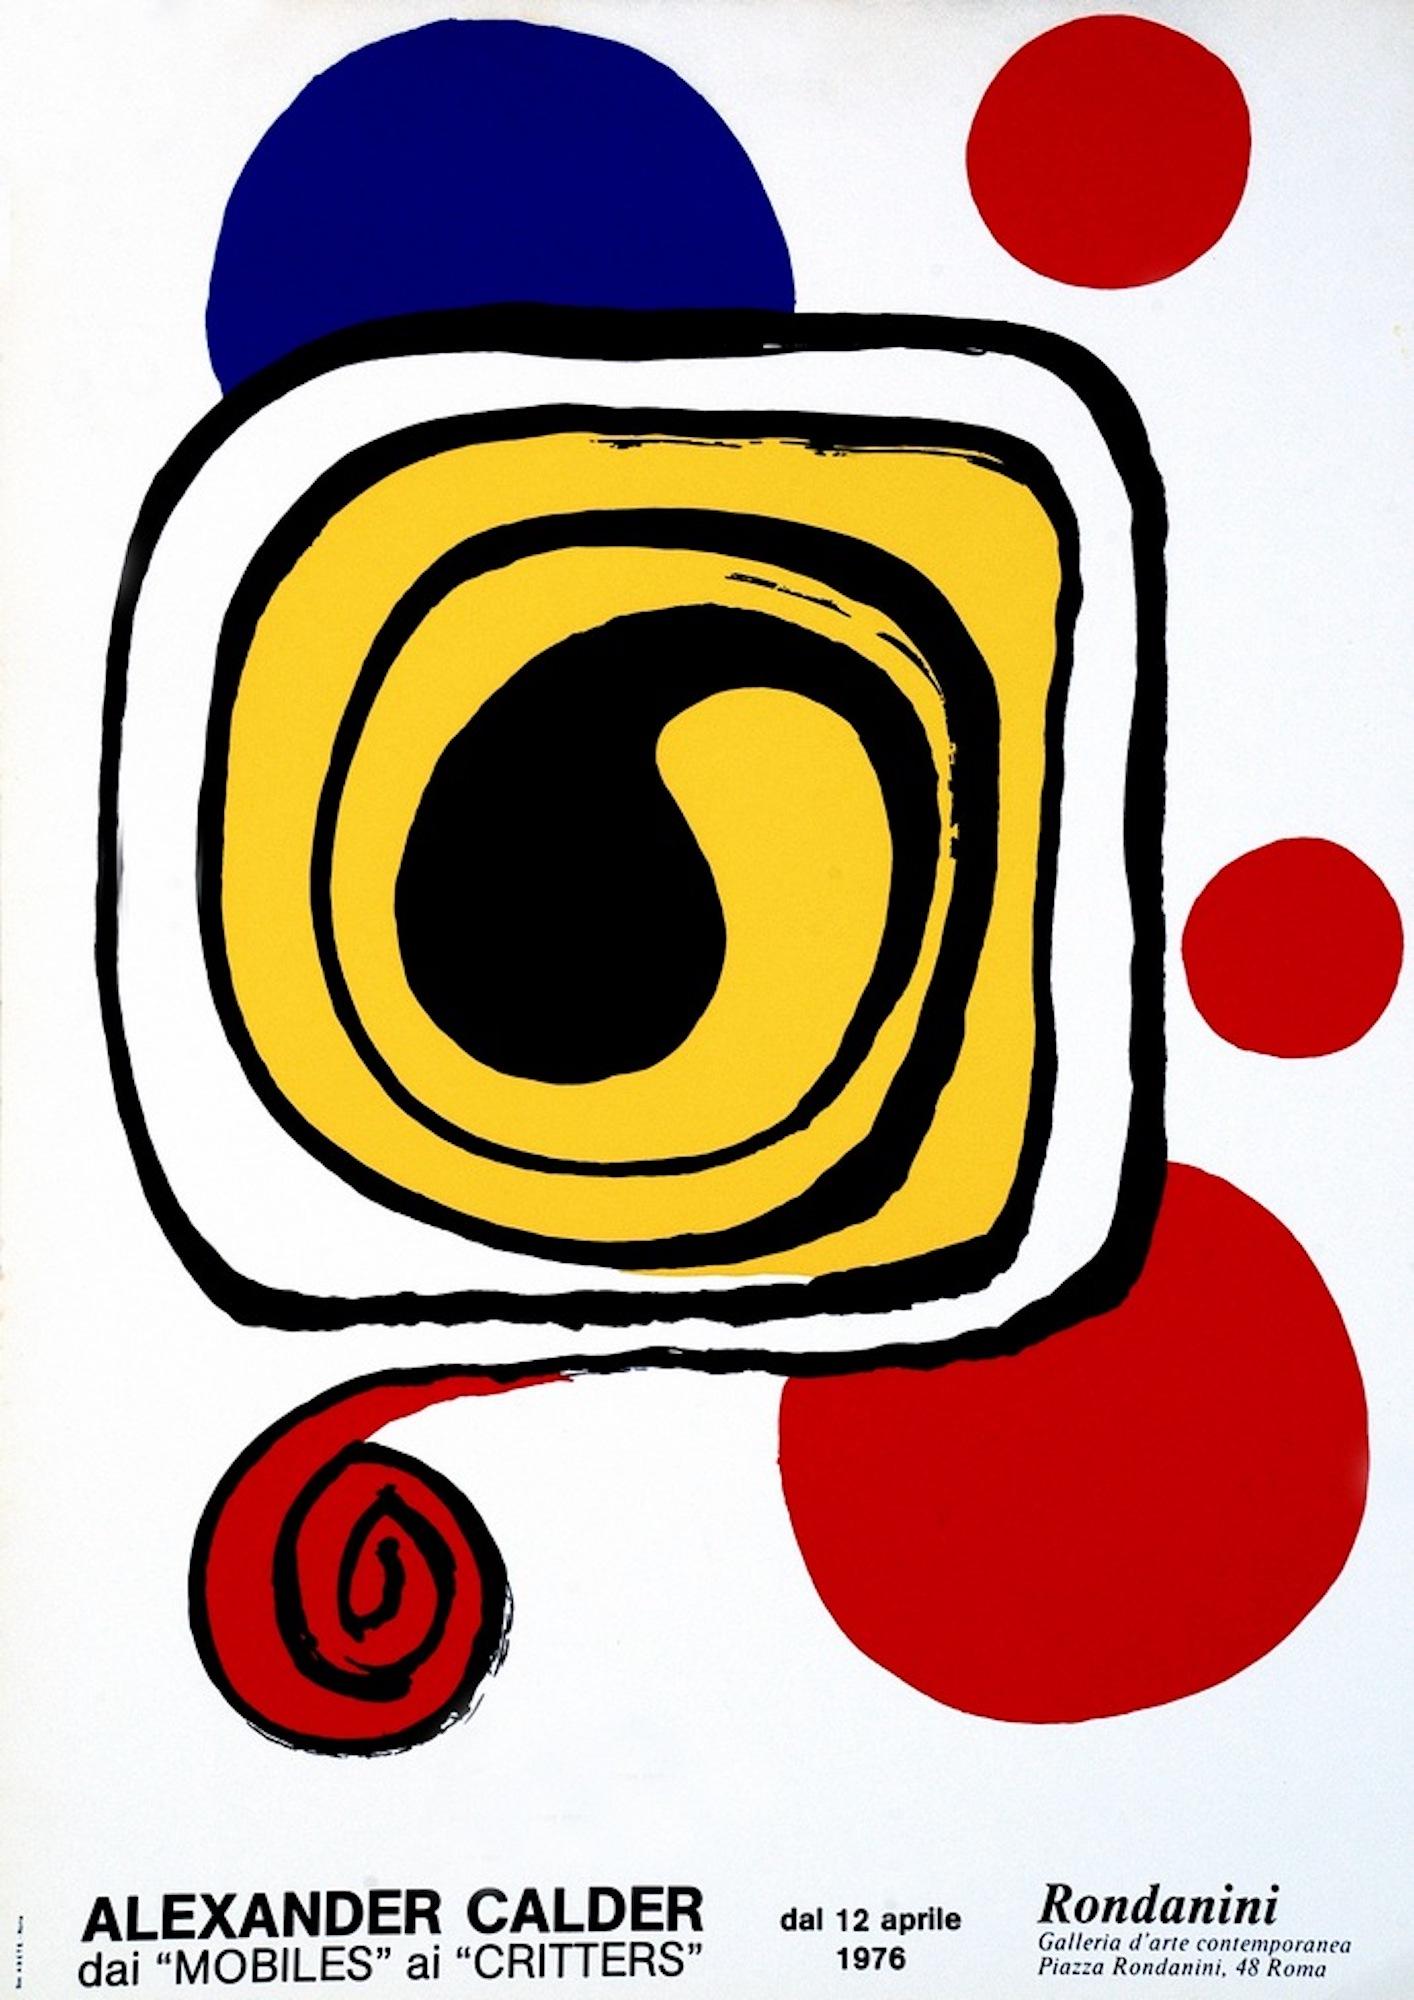 After Alexander Calder Abstract Print - From Mobiles to Critters - Vintage Lithographed Poster After A. Calder - 1976